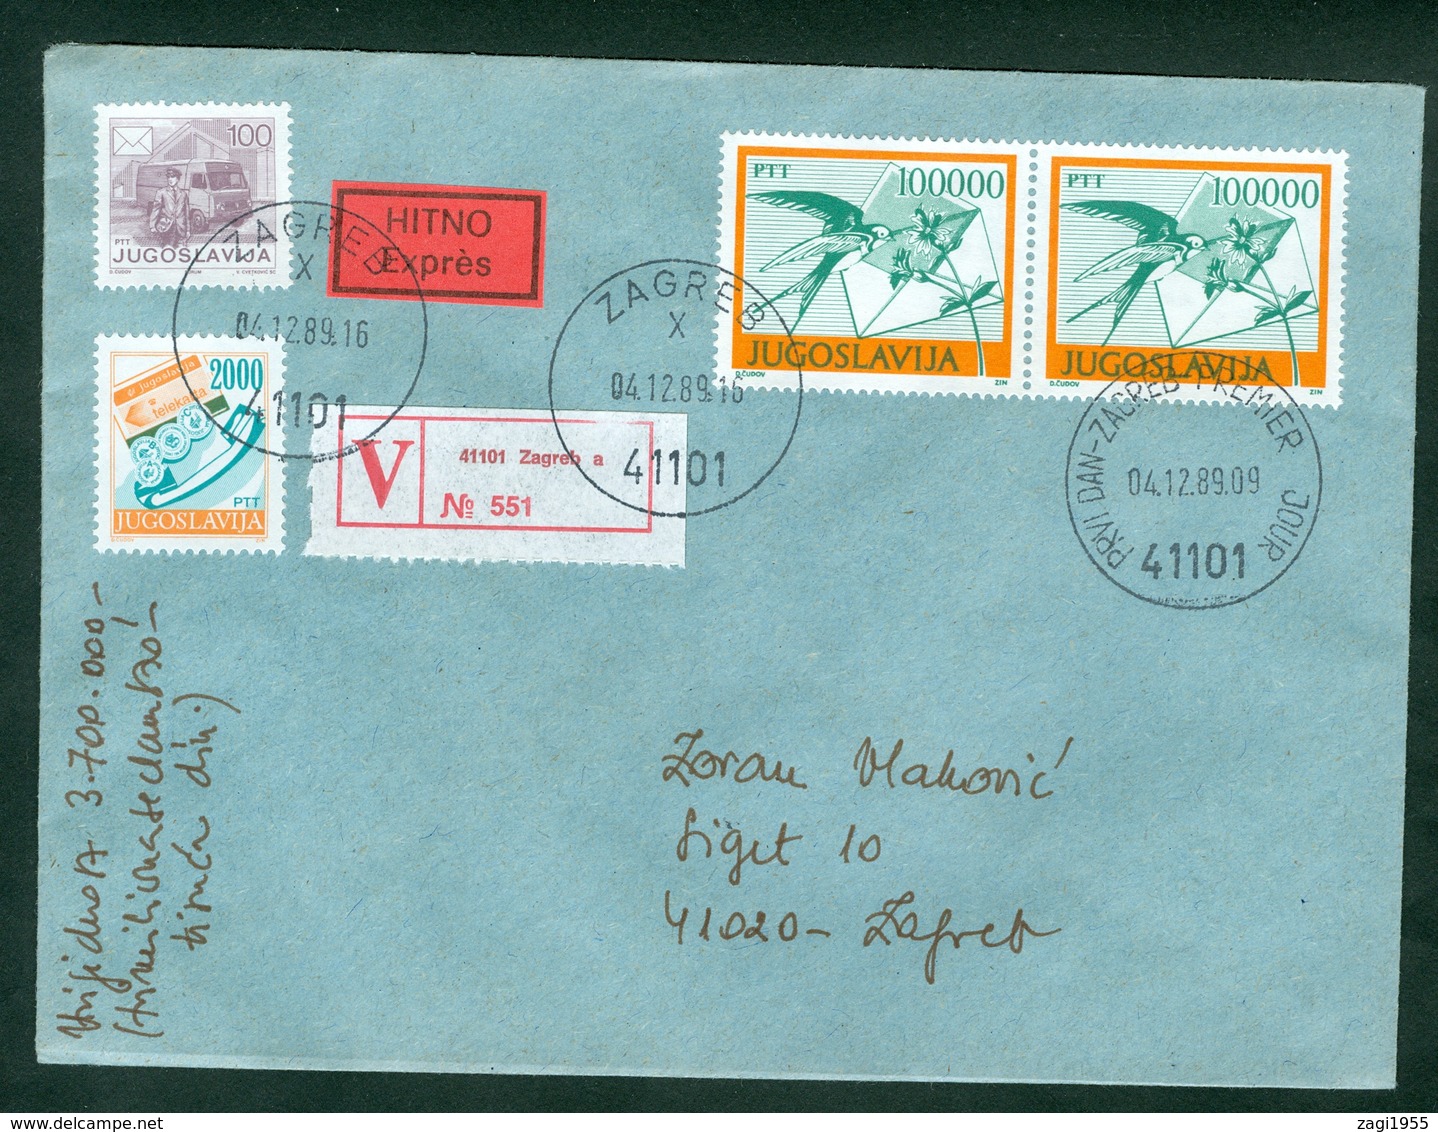 Yugoslavia 1989 FDC Definitive Issue Michel 2391 Swallow Valuable Letter Postal Traffic Inflation Postman - Covers & Documents